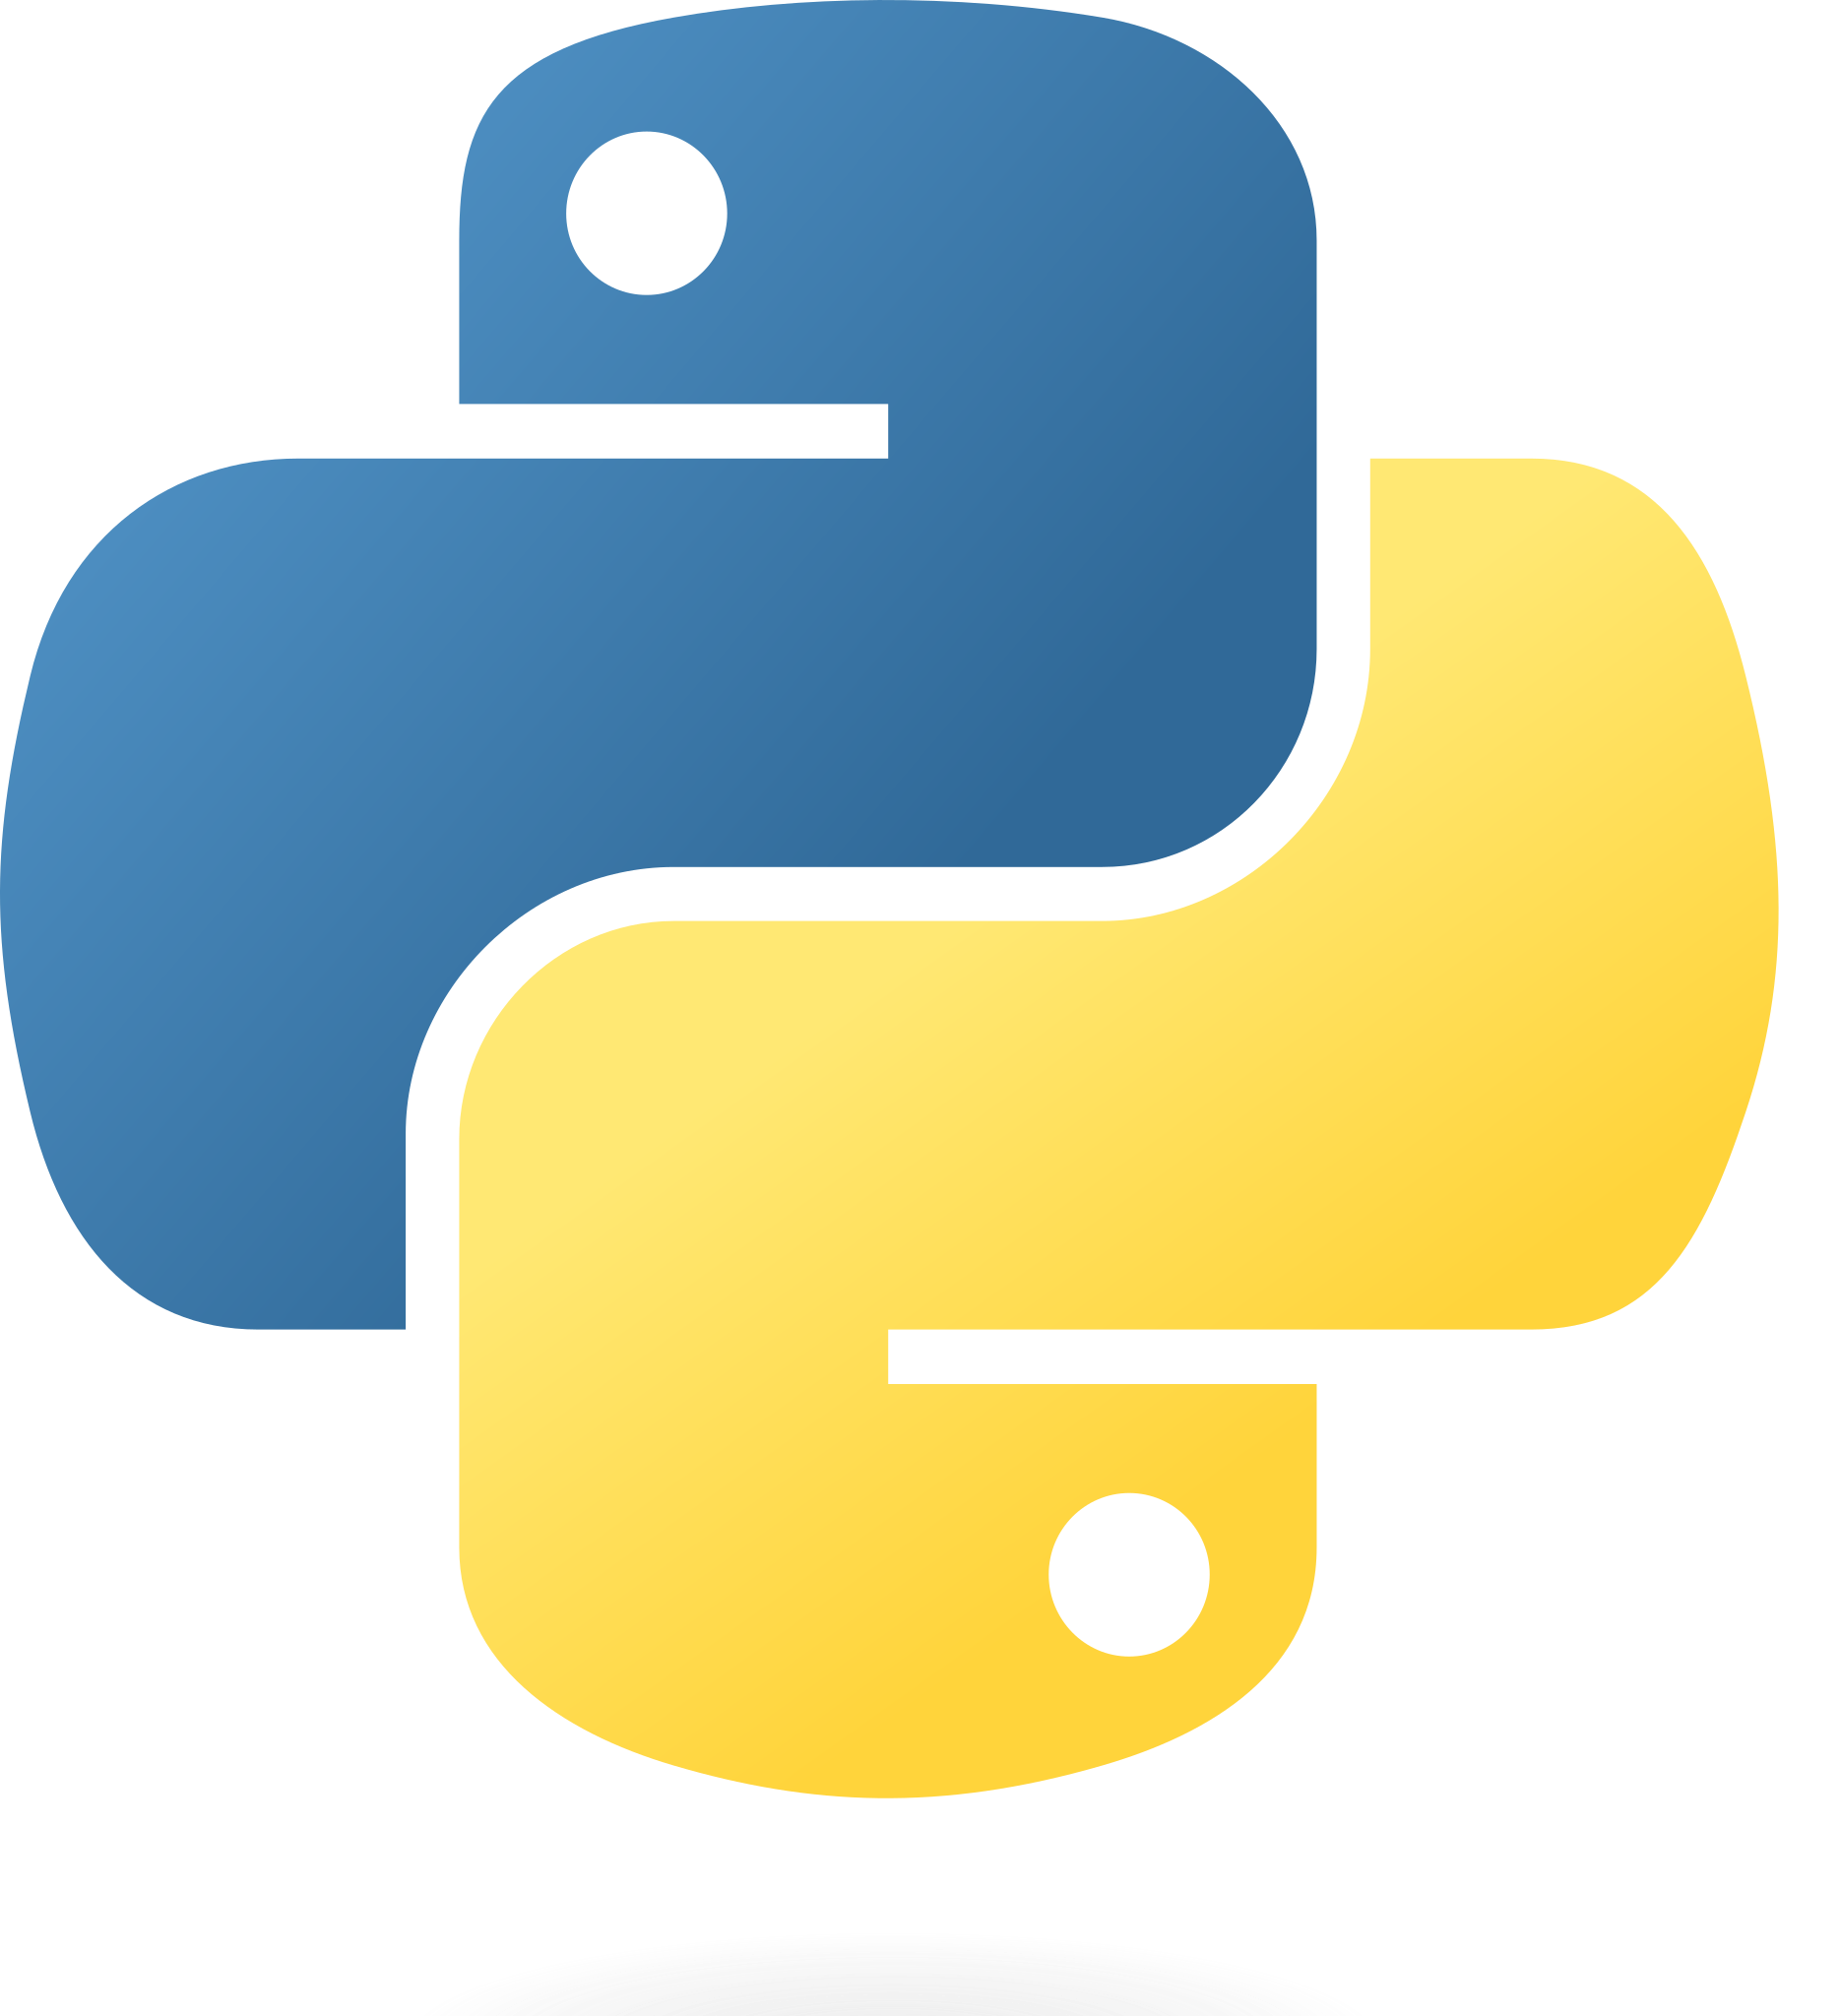 How to communicate and share data between running Python threads using threading library